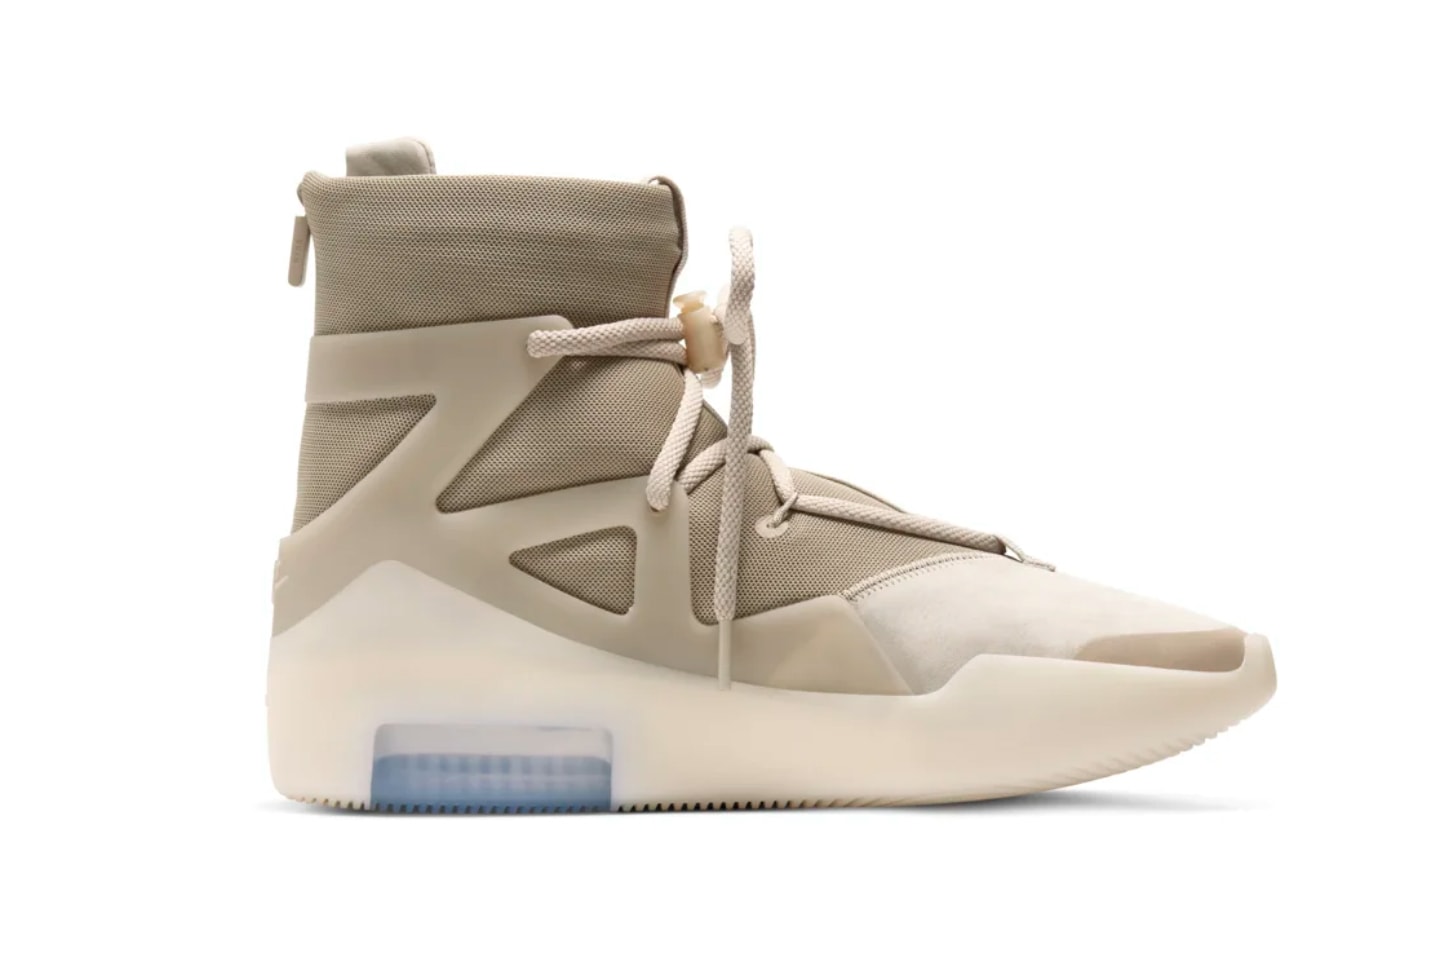 Nike Air Fear of God 1 “Oatmeal” official look release information Jerry Lorenzo Leo Chang basketball fashion military collaborations 